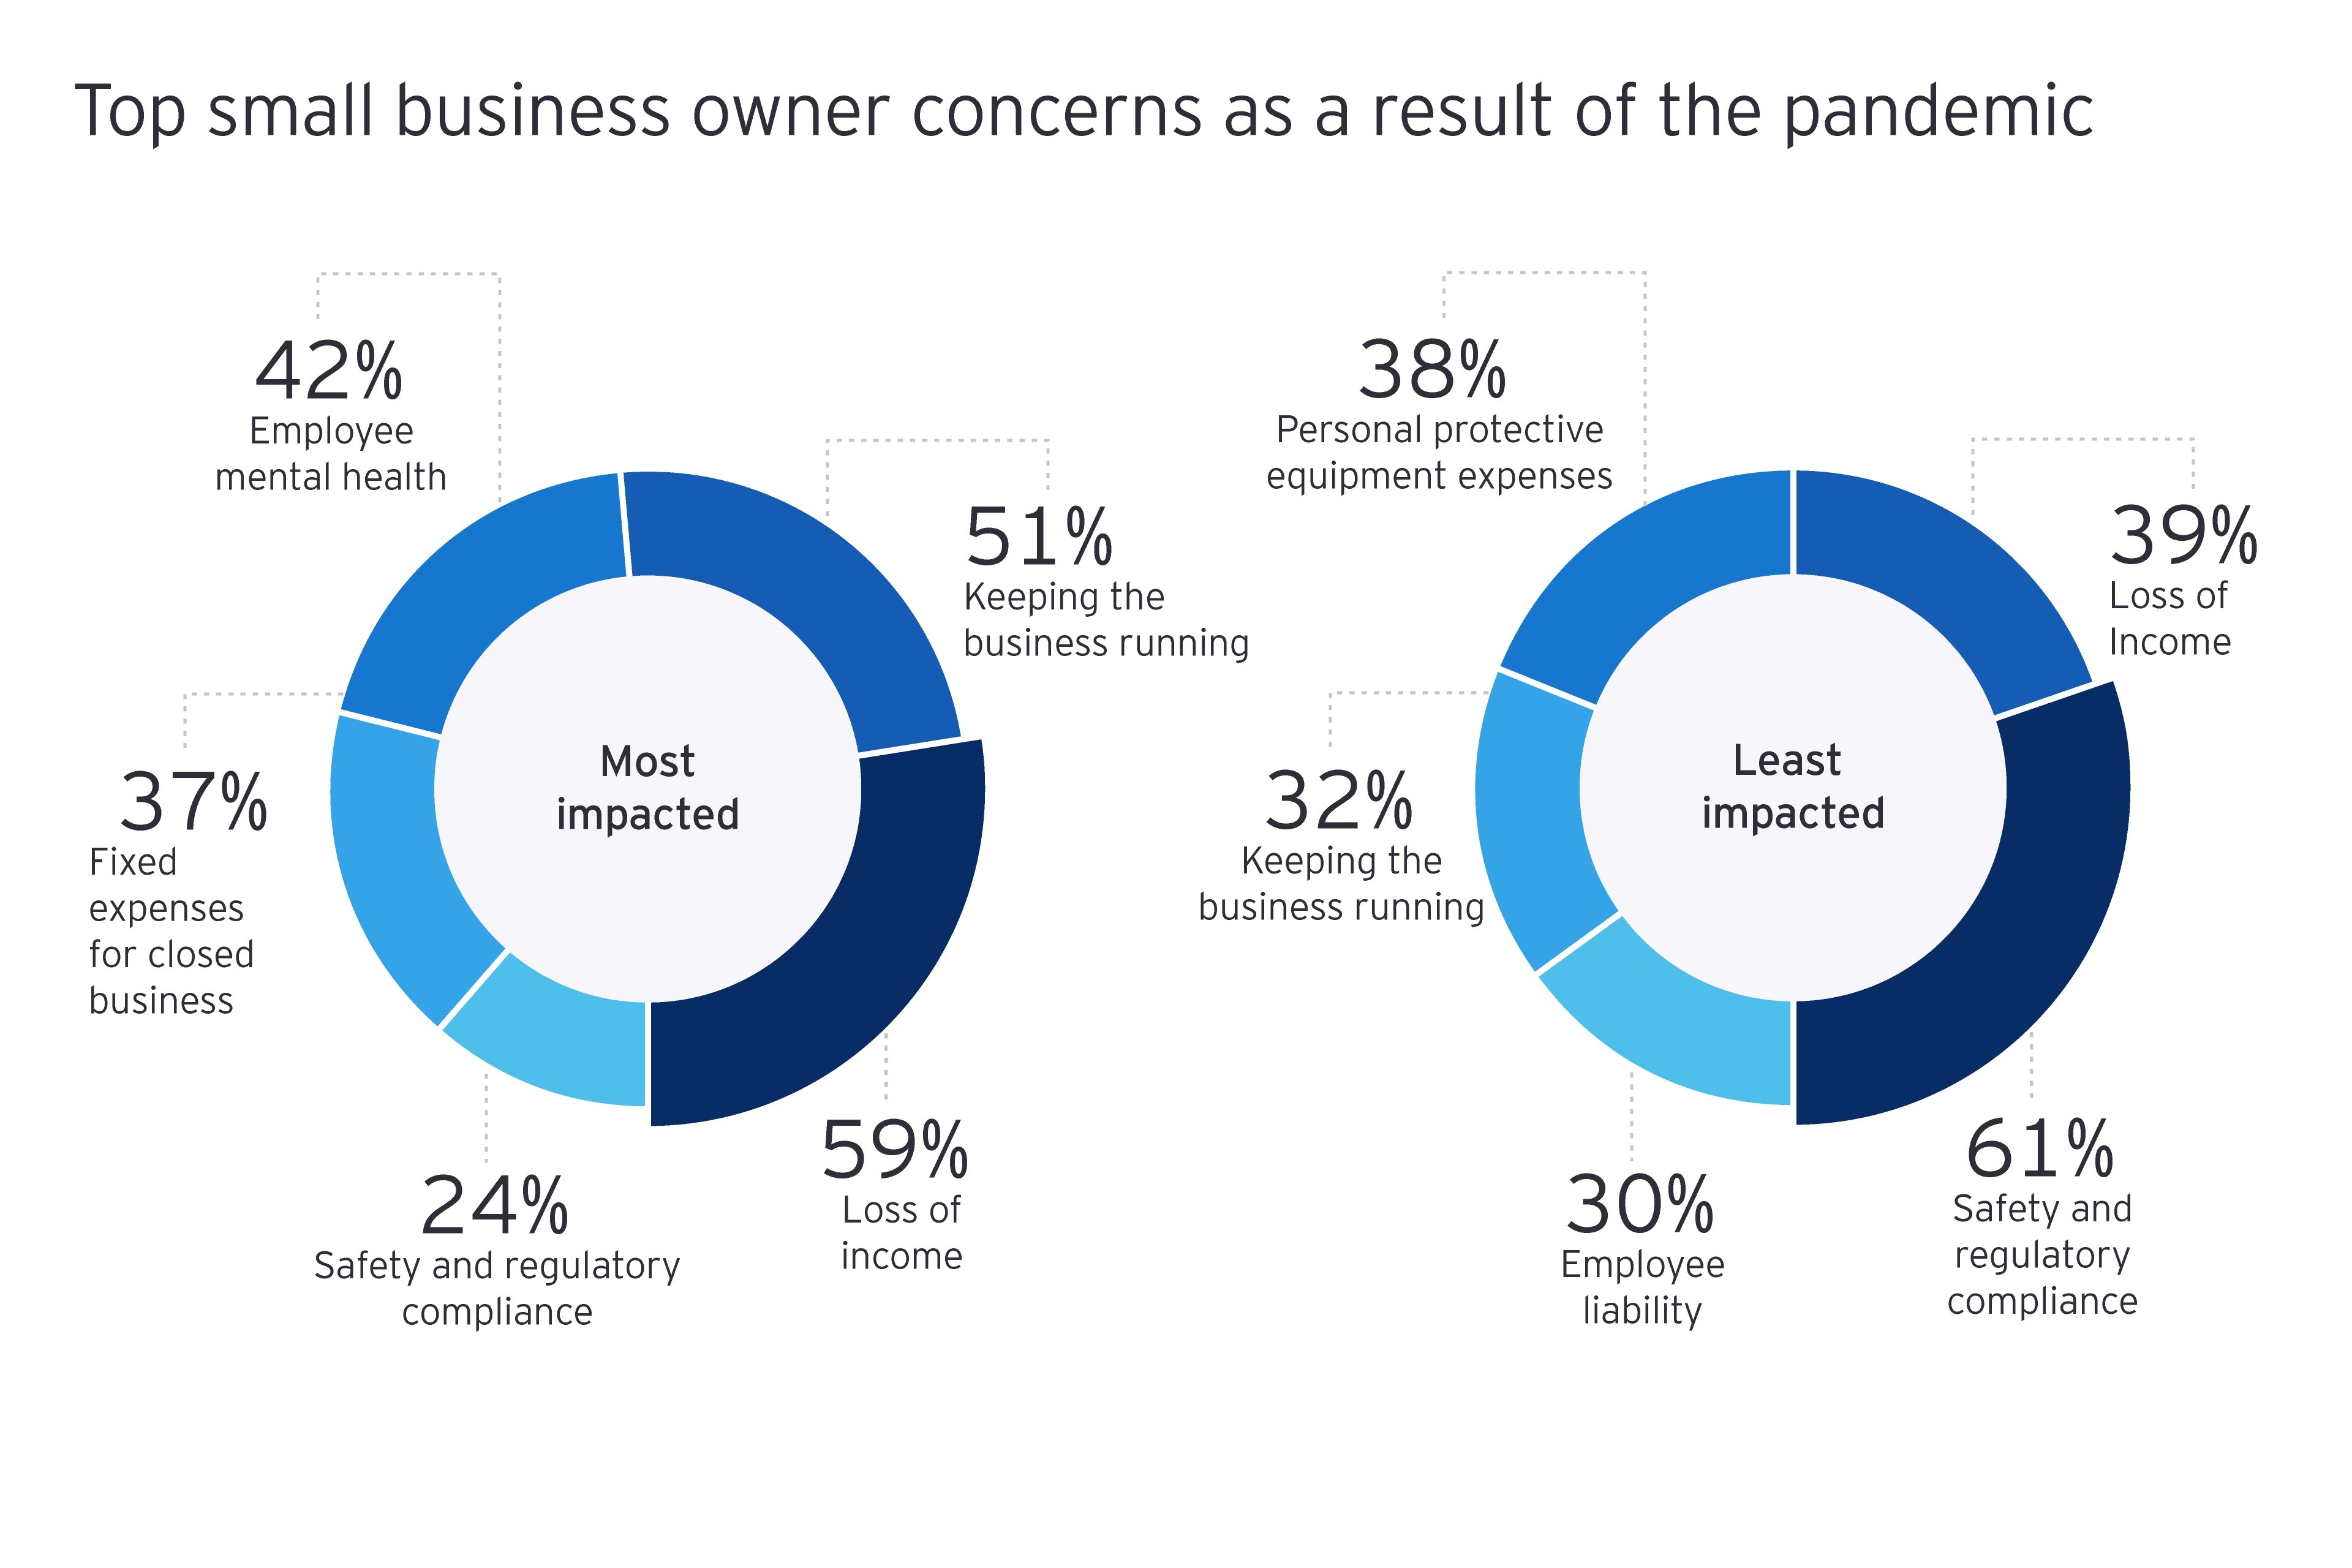 Top small business owner concerns as a result of the pandemic